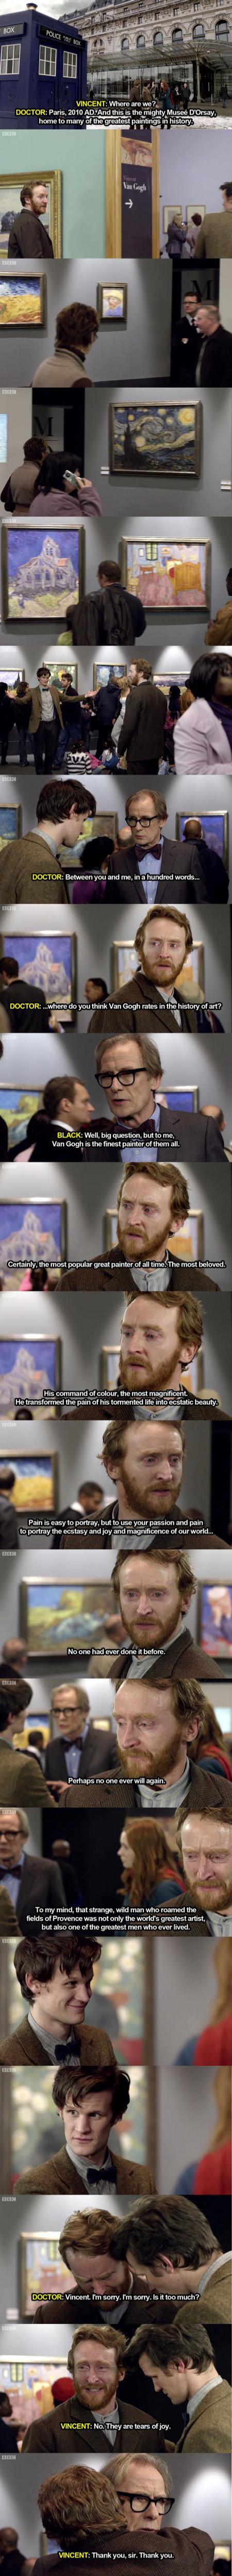 Vincent Van Gogh and Doctor Who Make a great episode